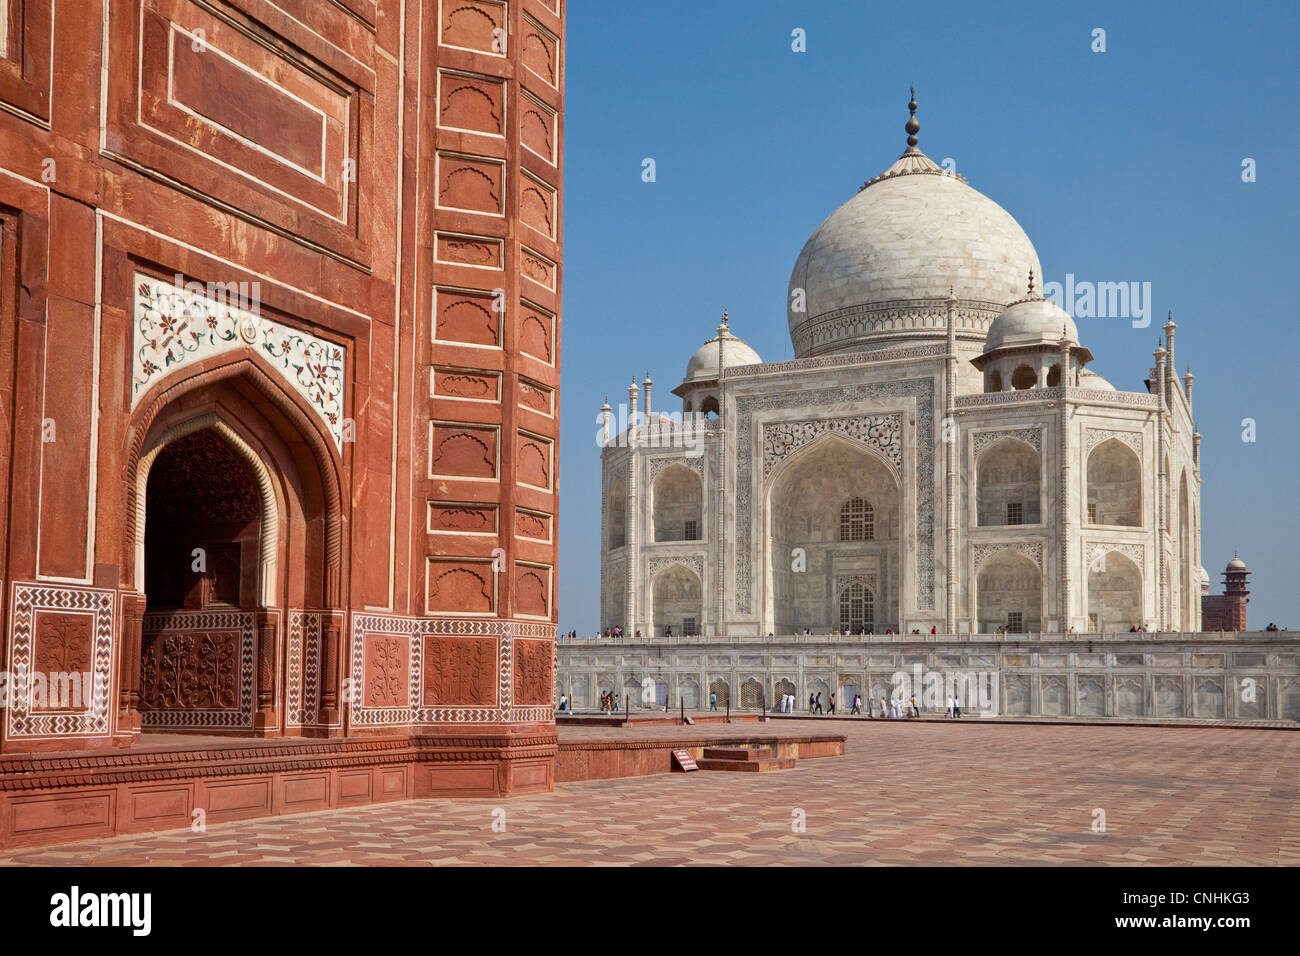 Agra, India. Taj Mahal view from the Mosque, on left. Stock Photo